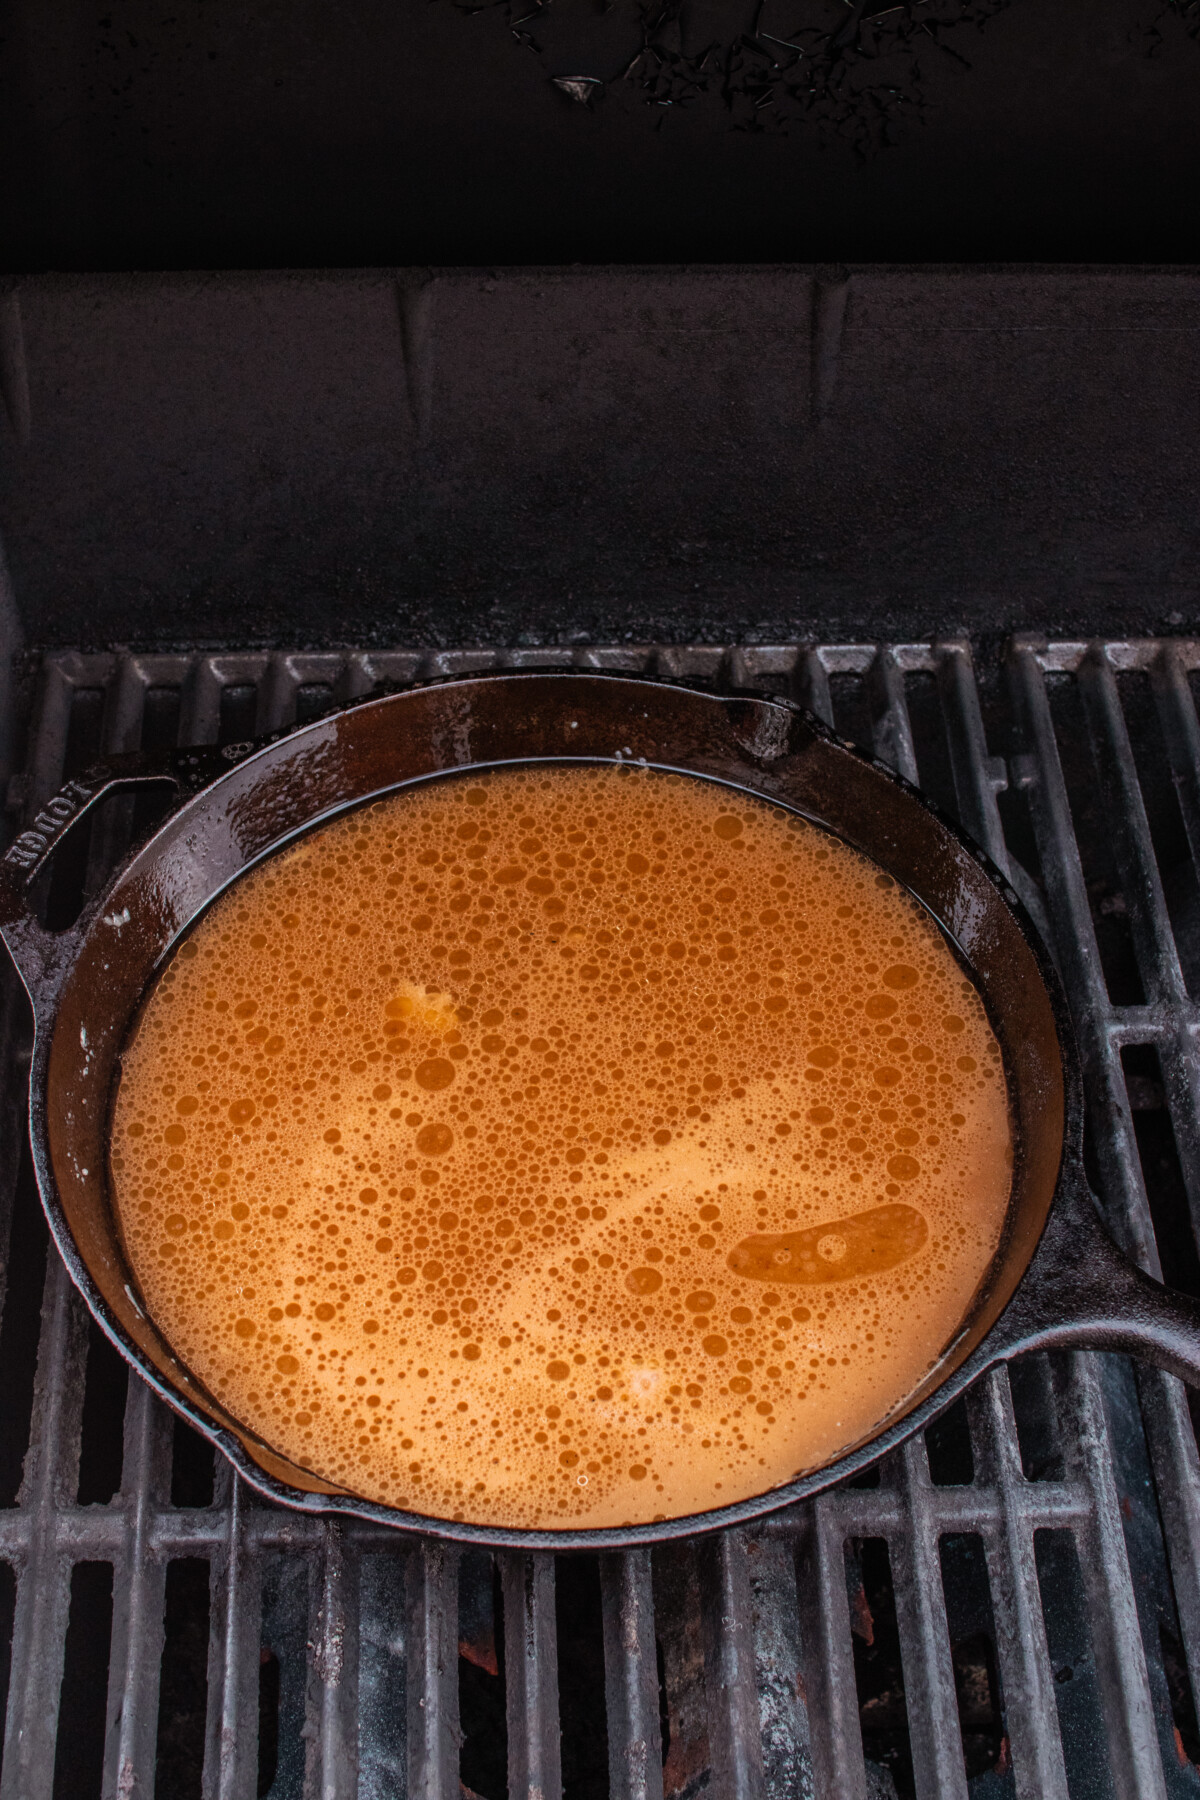 Liquid bubbling in cast iron skillet on grill.